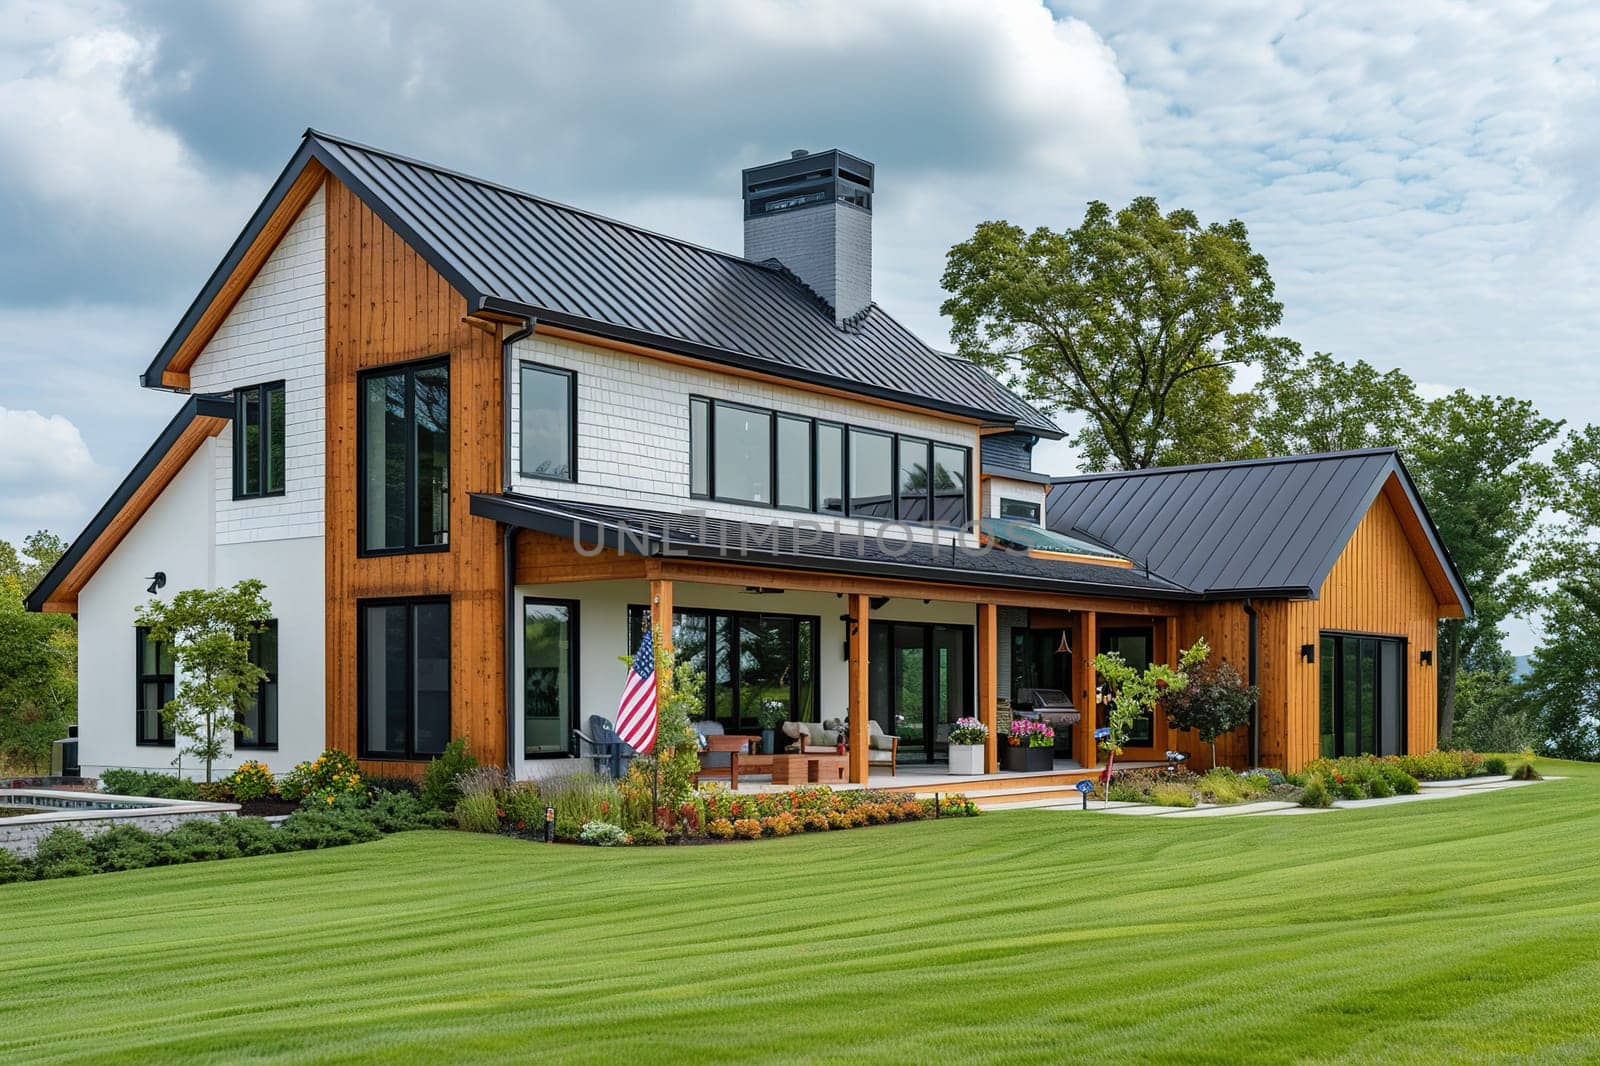 A beautiful two-story American-style house on a green lawn with a usa flag.